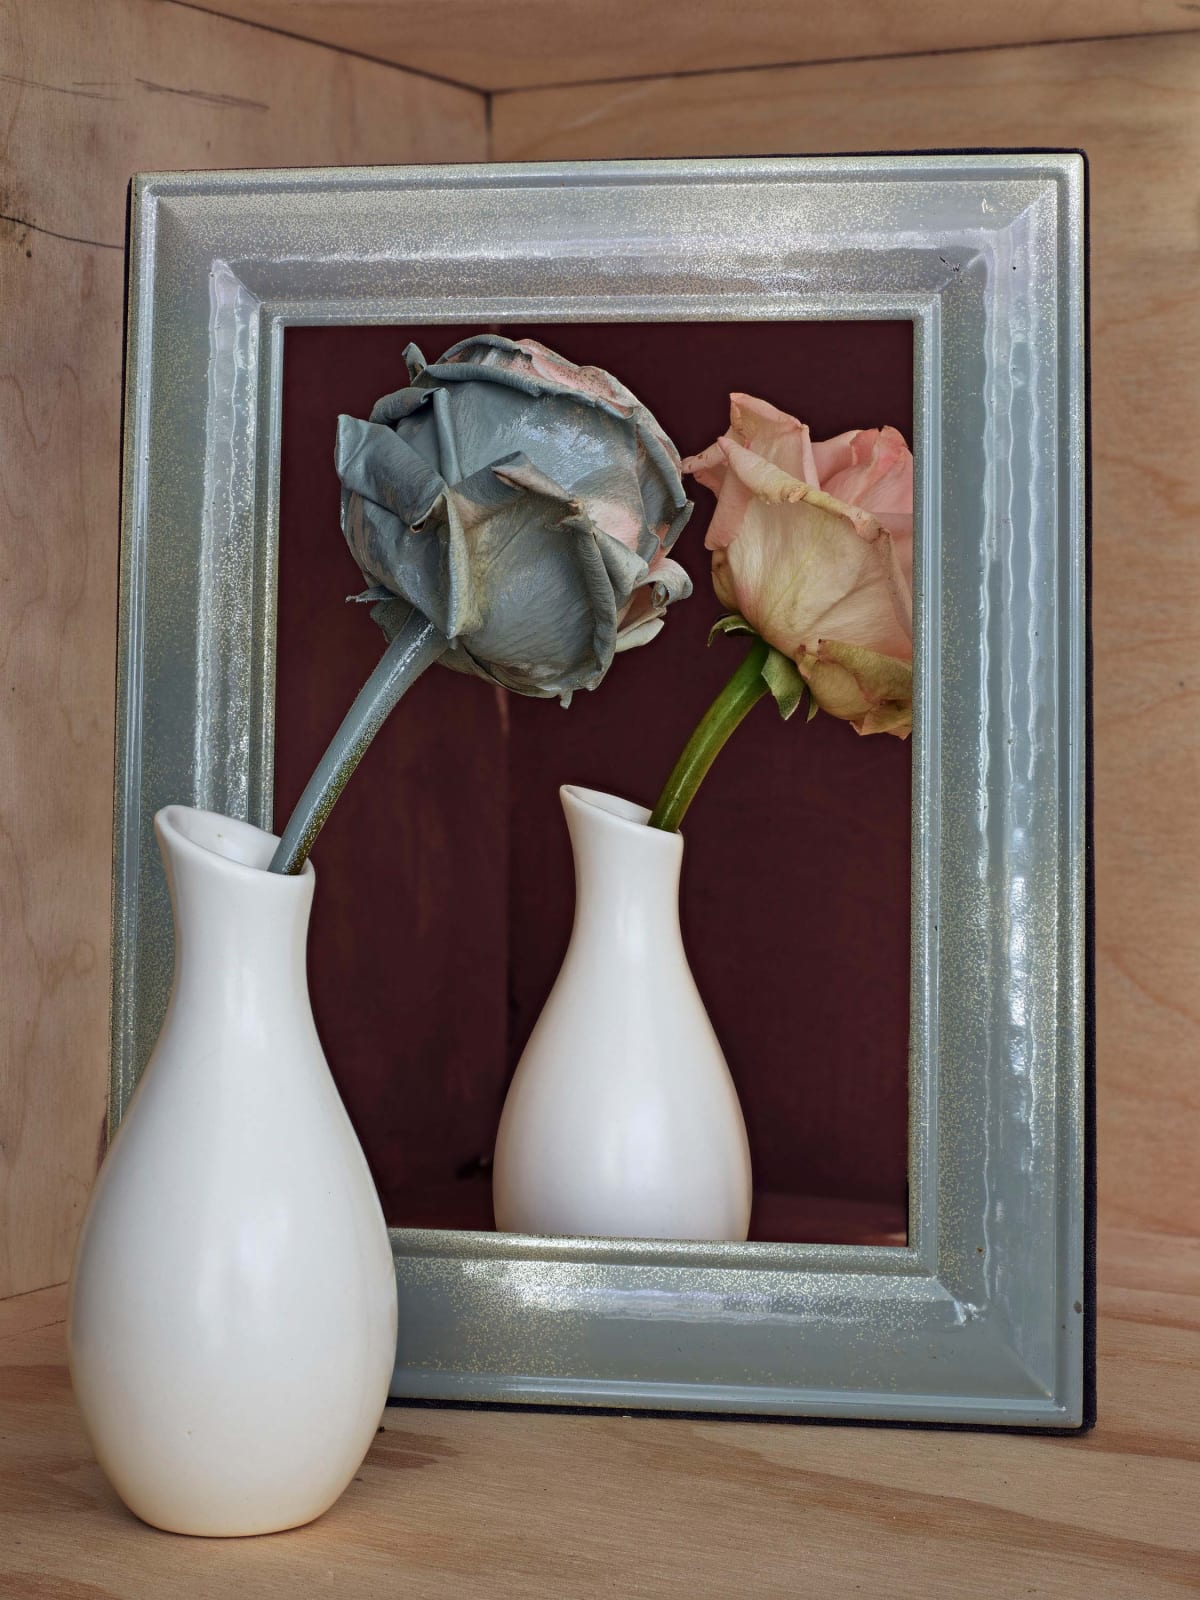 Abelardo Morell Flowers for Lisa #13 pink rose half painted blue in vase in mirror illusion of two roses Magritte style